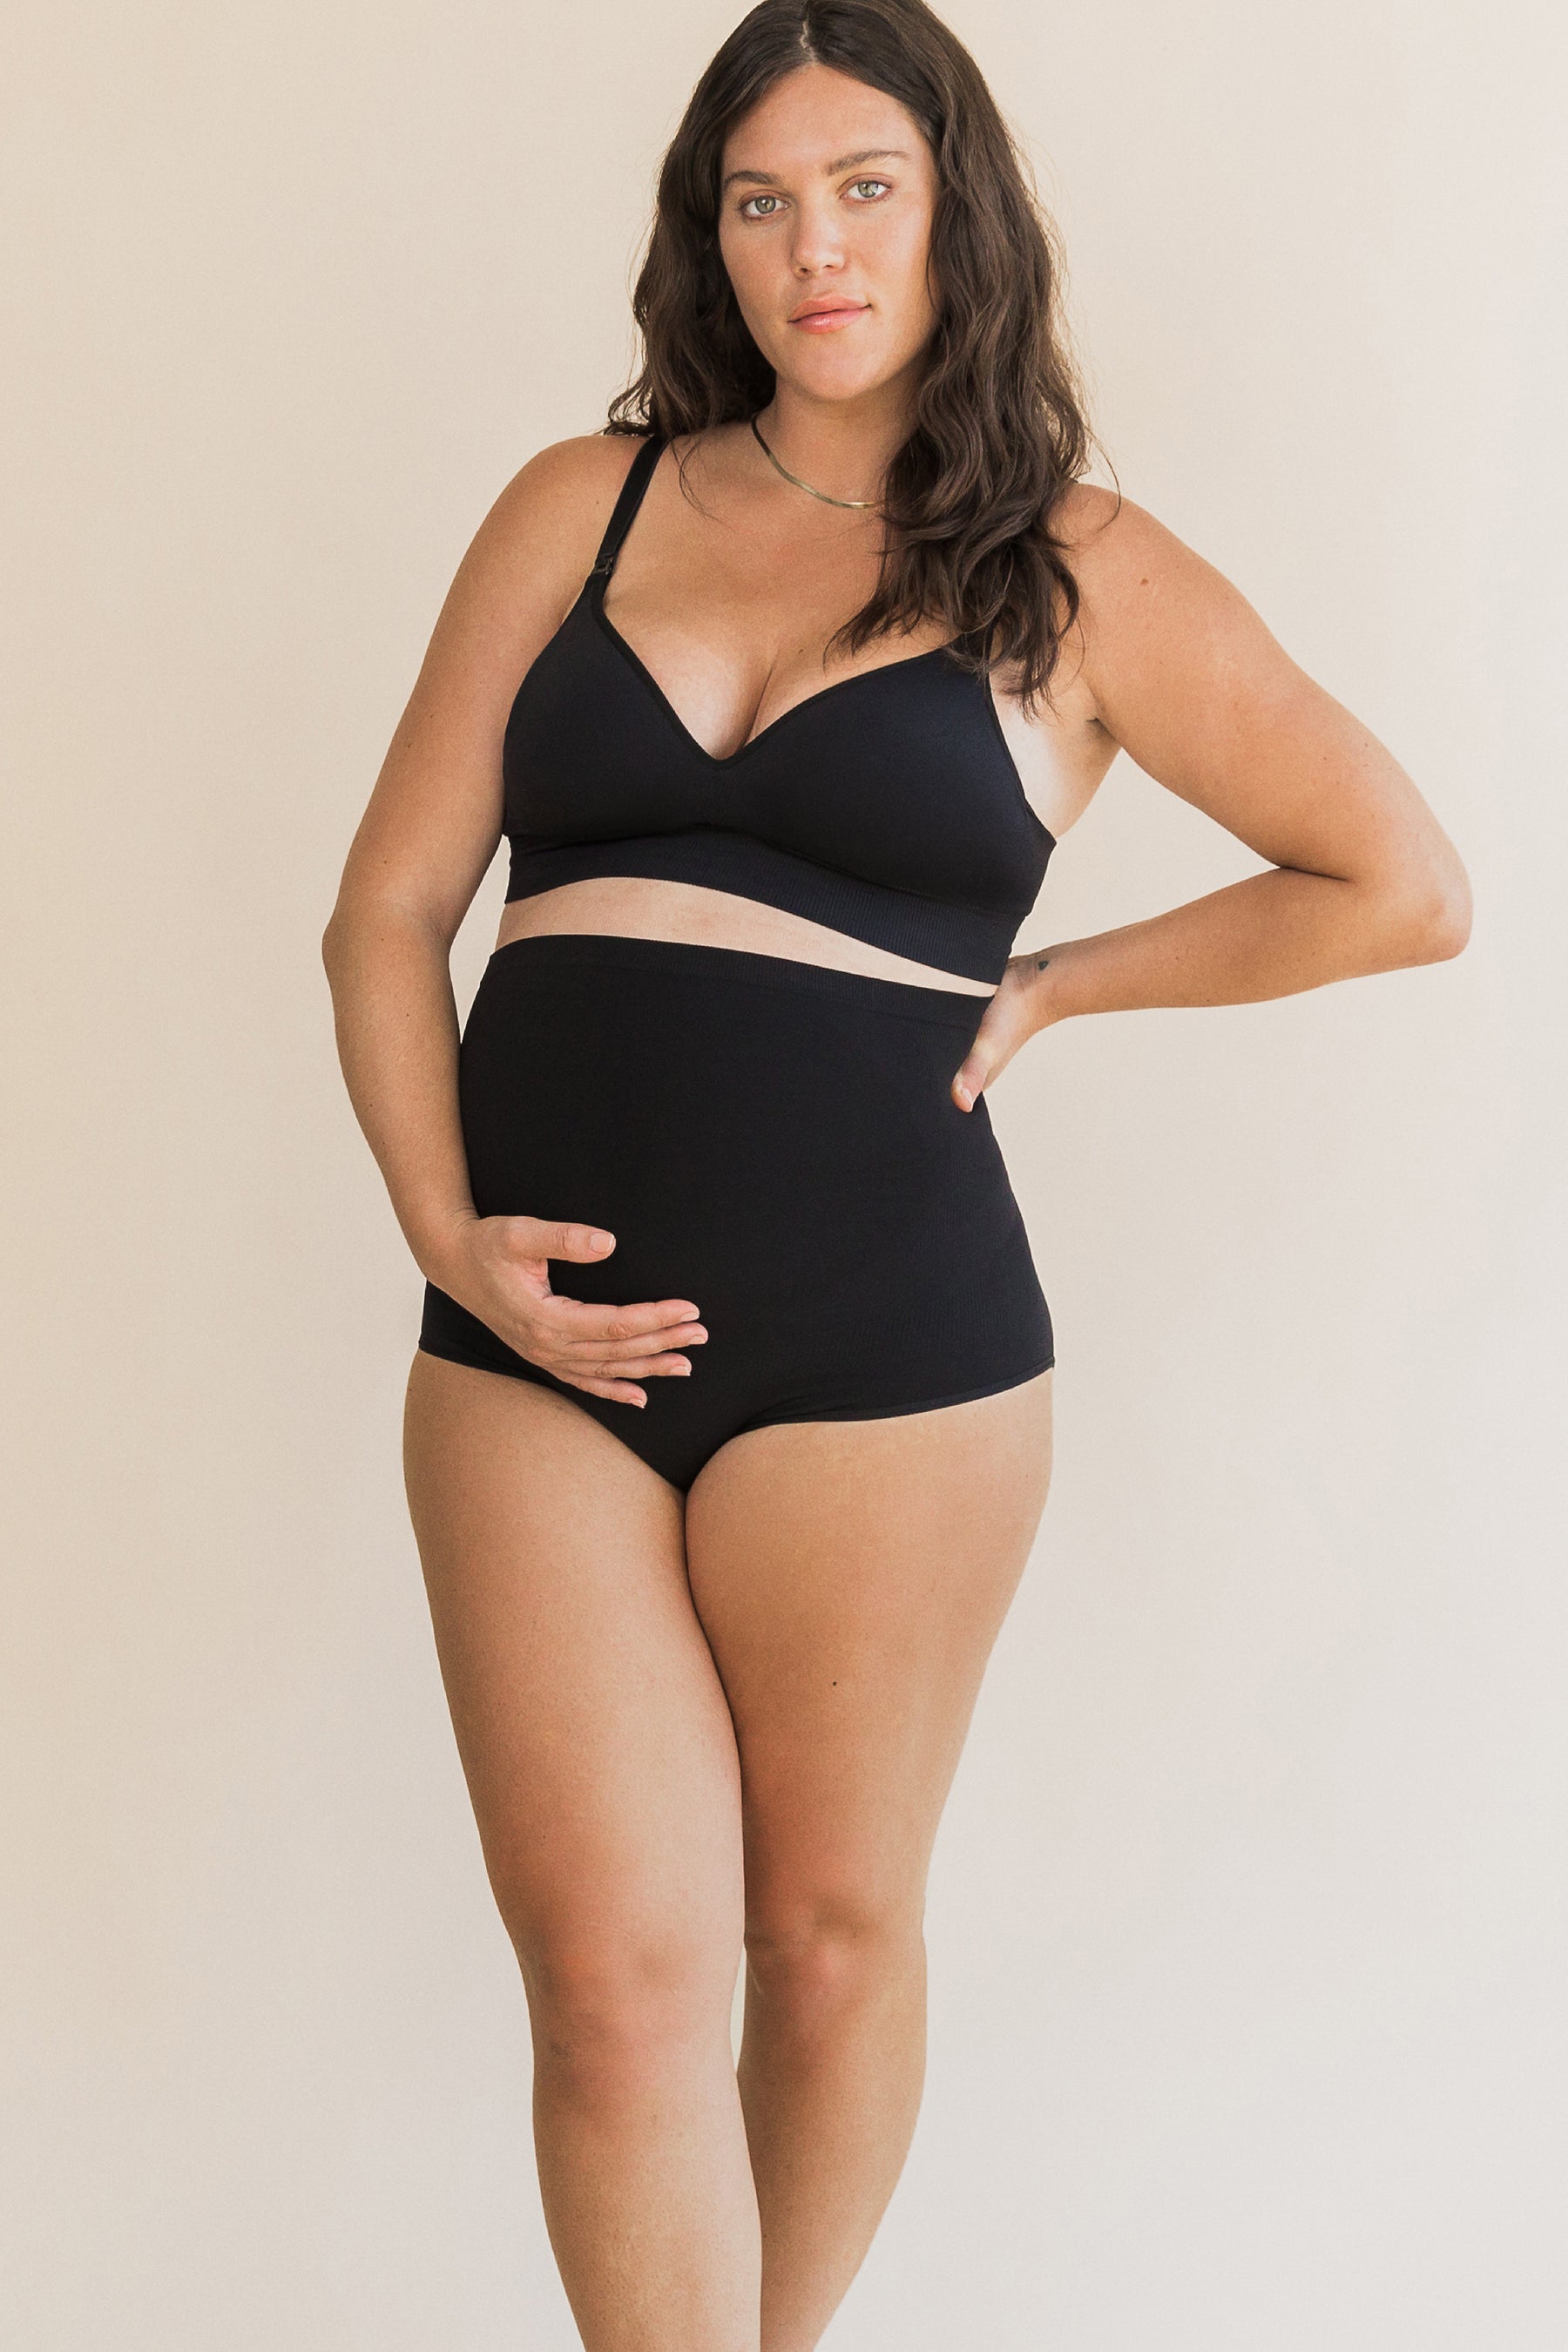 Seamless Maternity Over Belly Support Panties